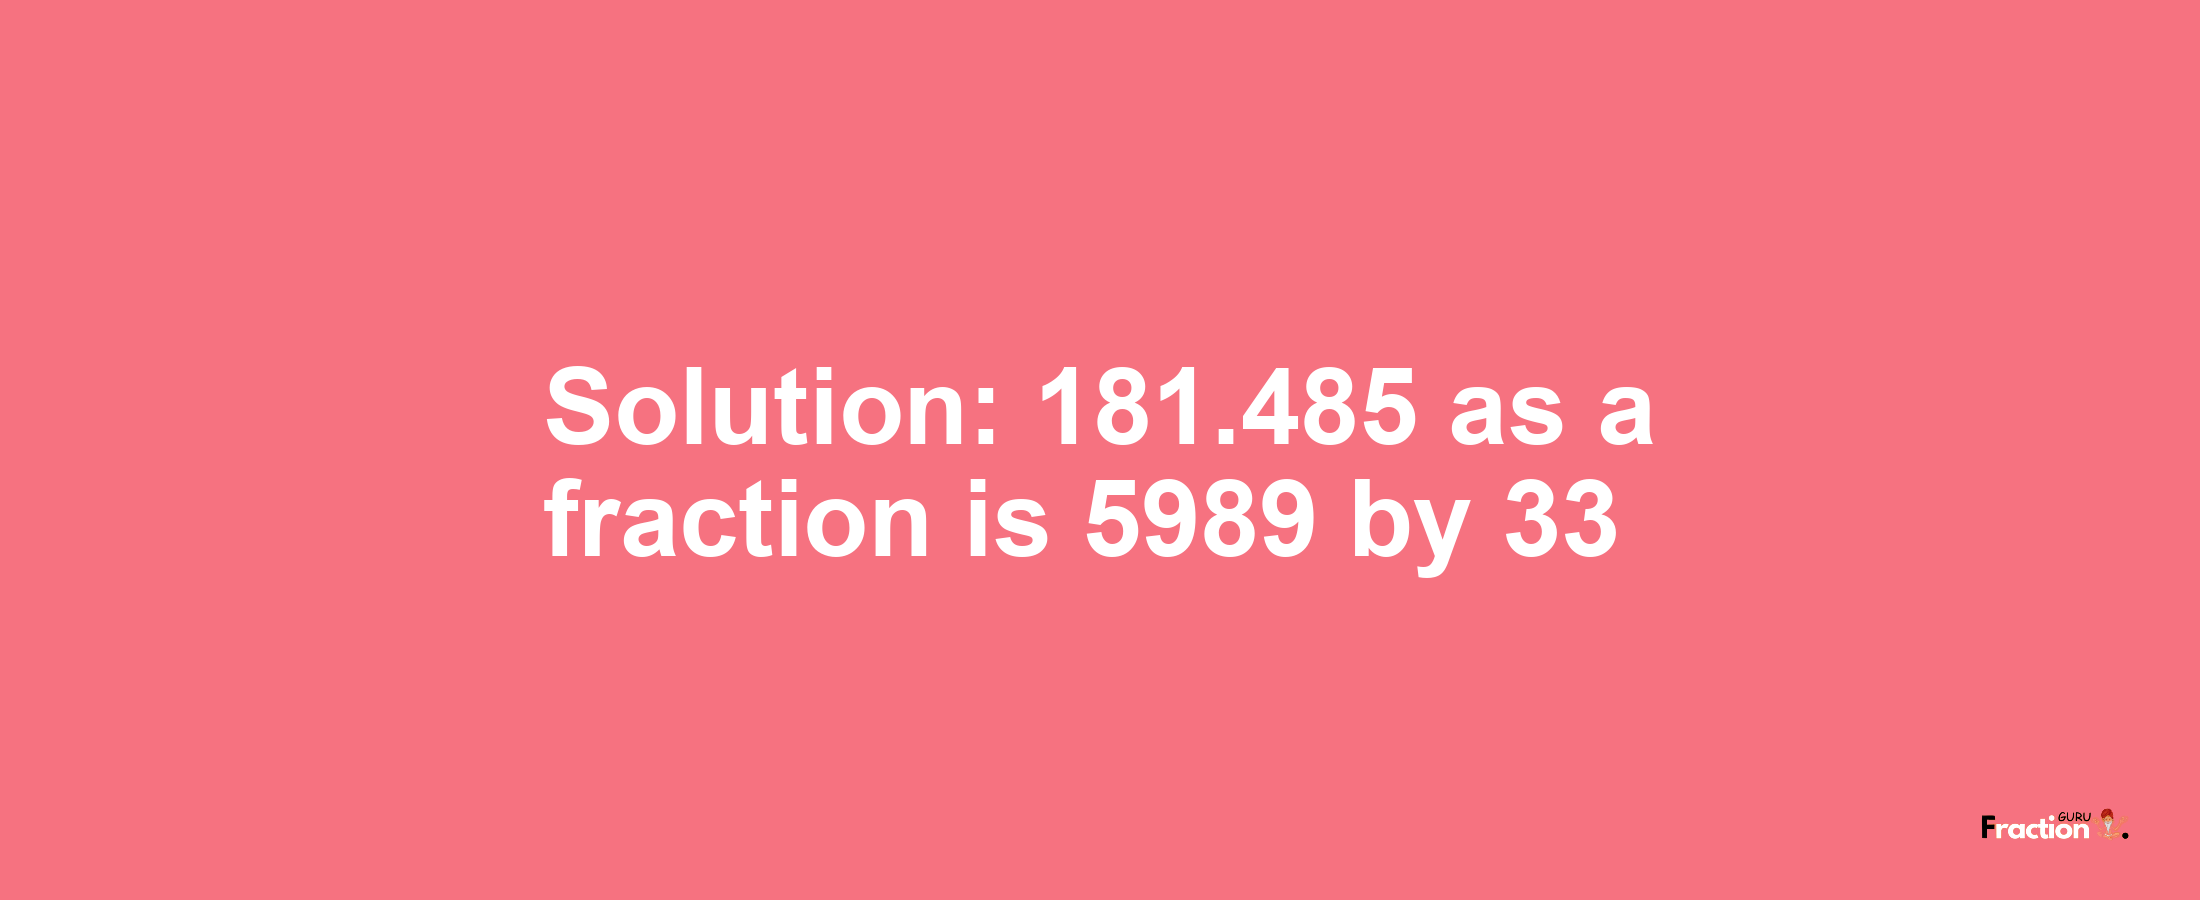 Solution:181.485 as a fraction is 5989/33